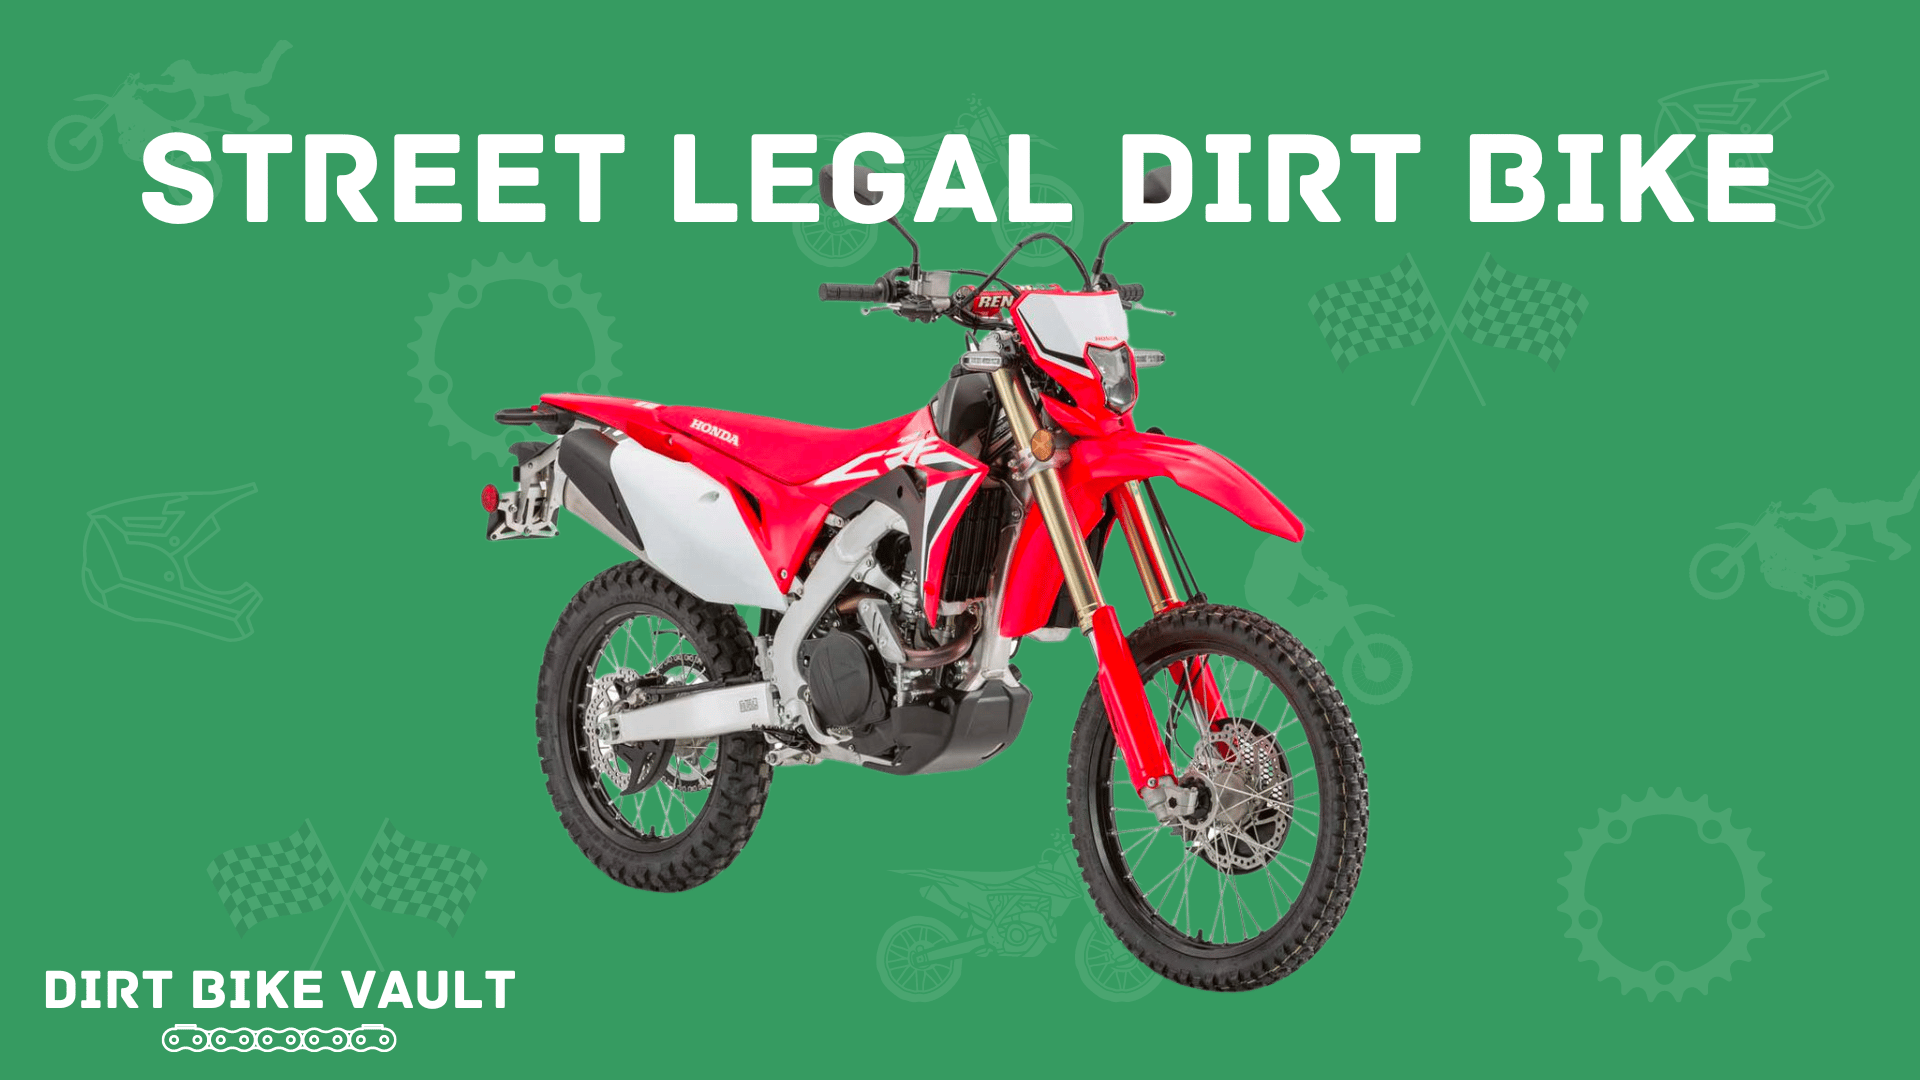 street legal dirt bike in white text on green background